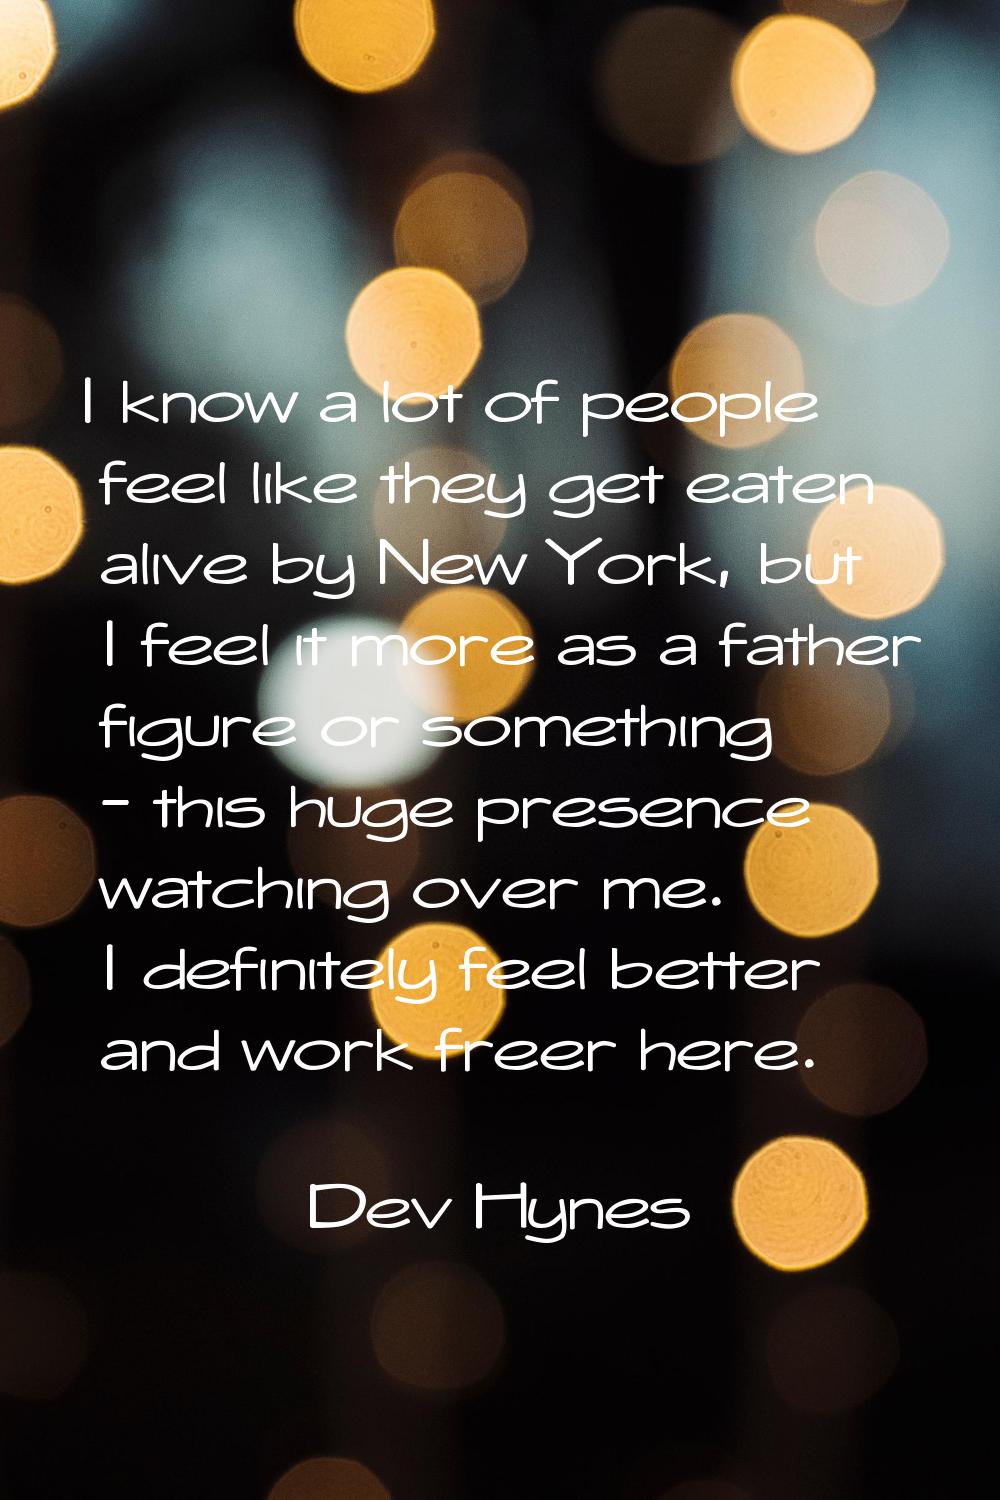 I know a lot of people feel like they get eaten alive by New York, but I feel it more as a father f